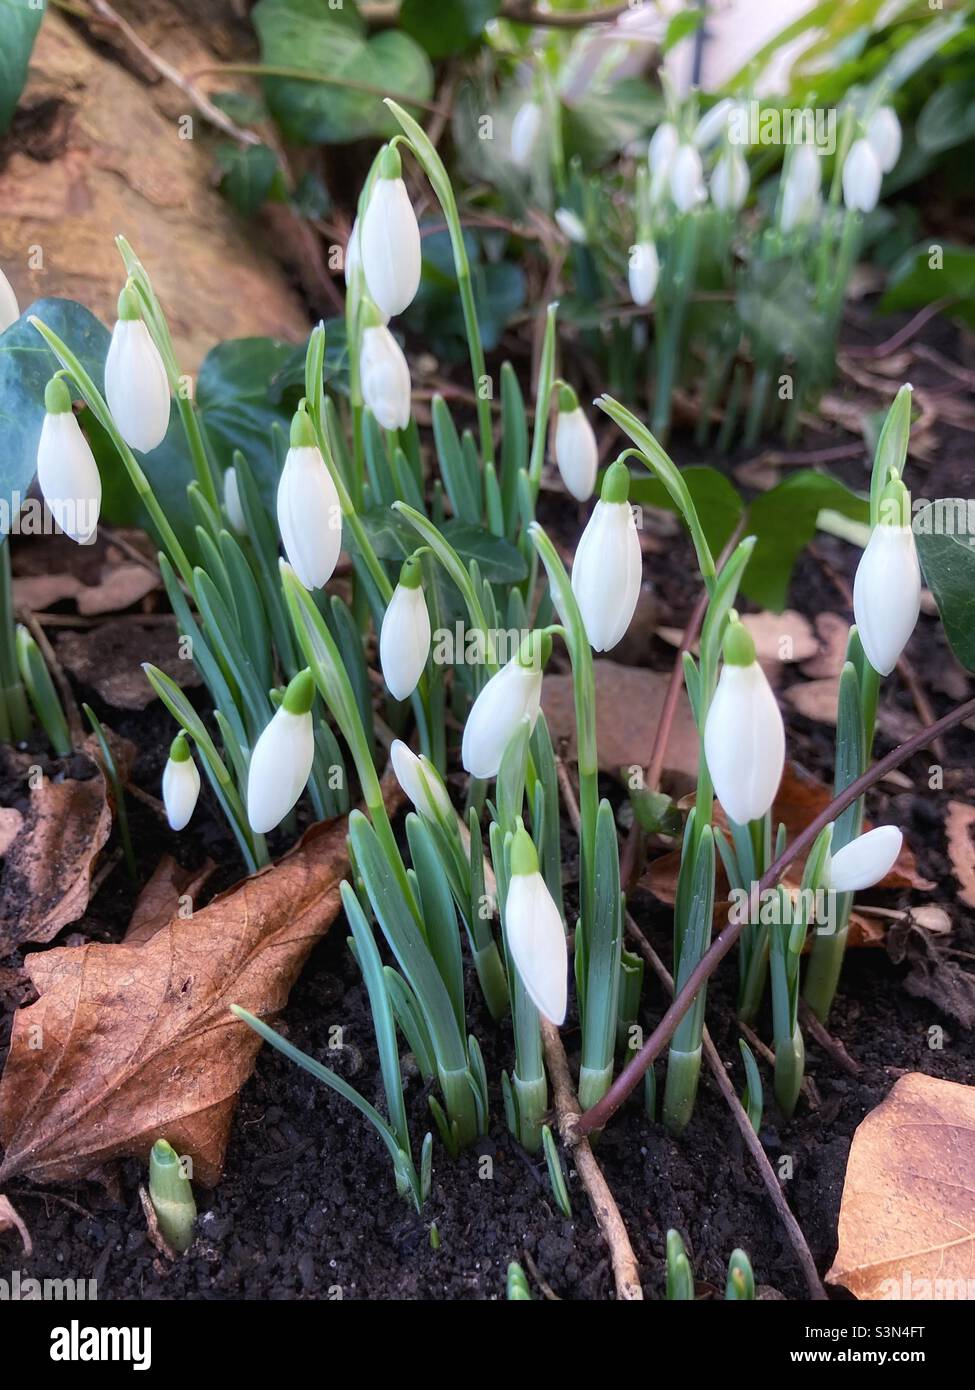 Snowdrops in Somerset, UK surrounded by dried leaves on woodland floor Stock Photo